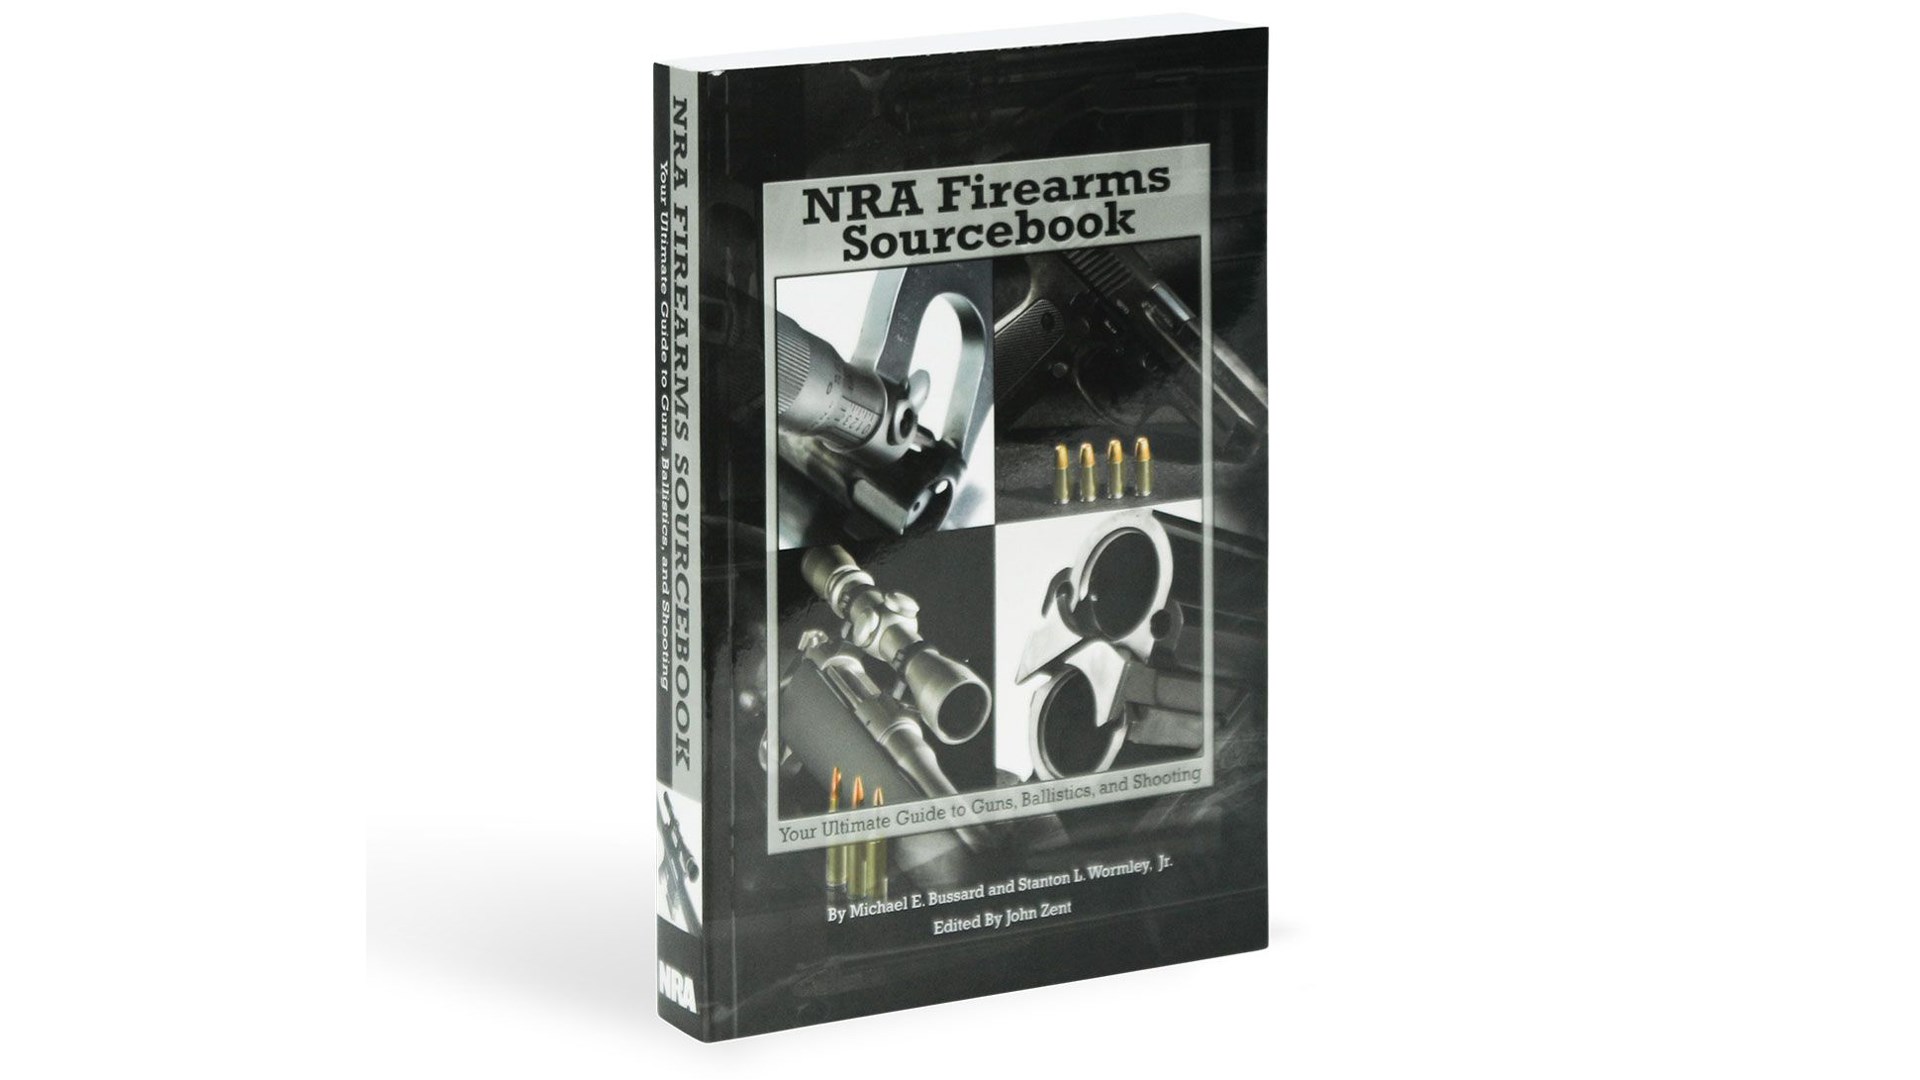 NRA Firearms Sourcebook book cover